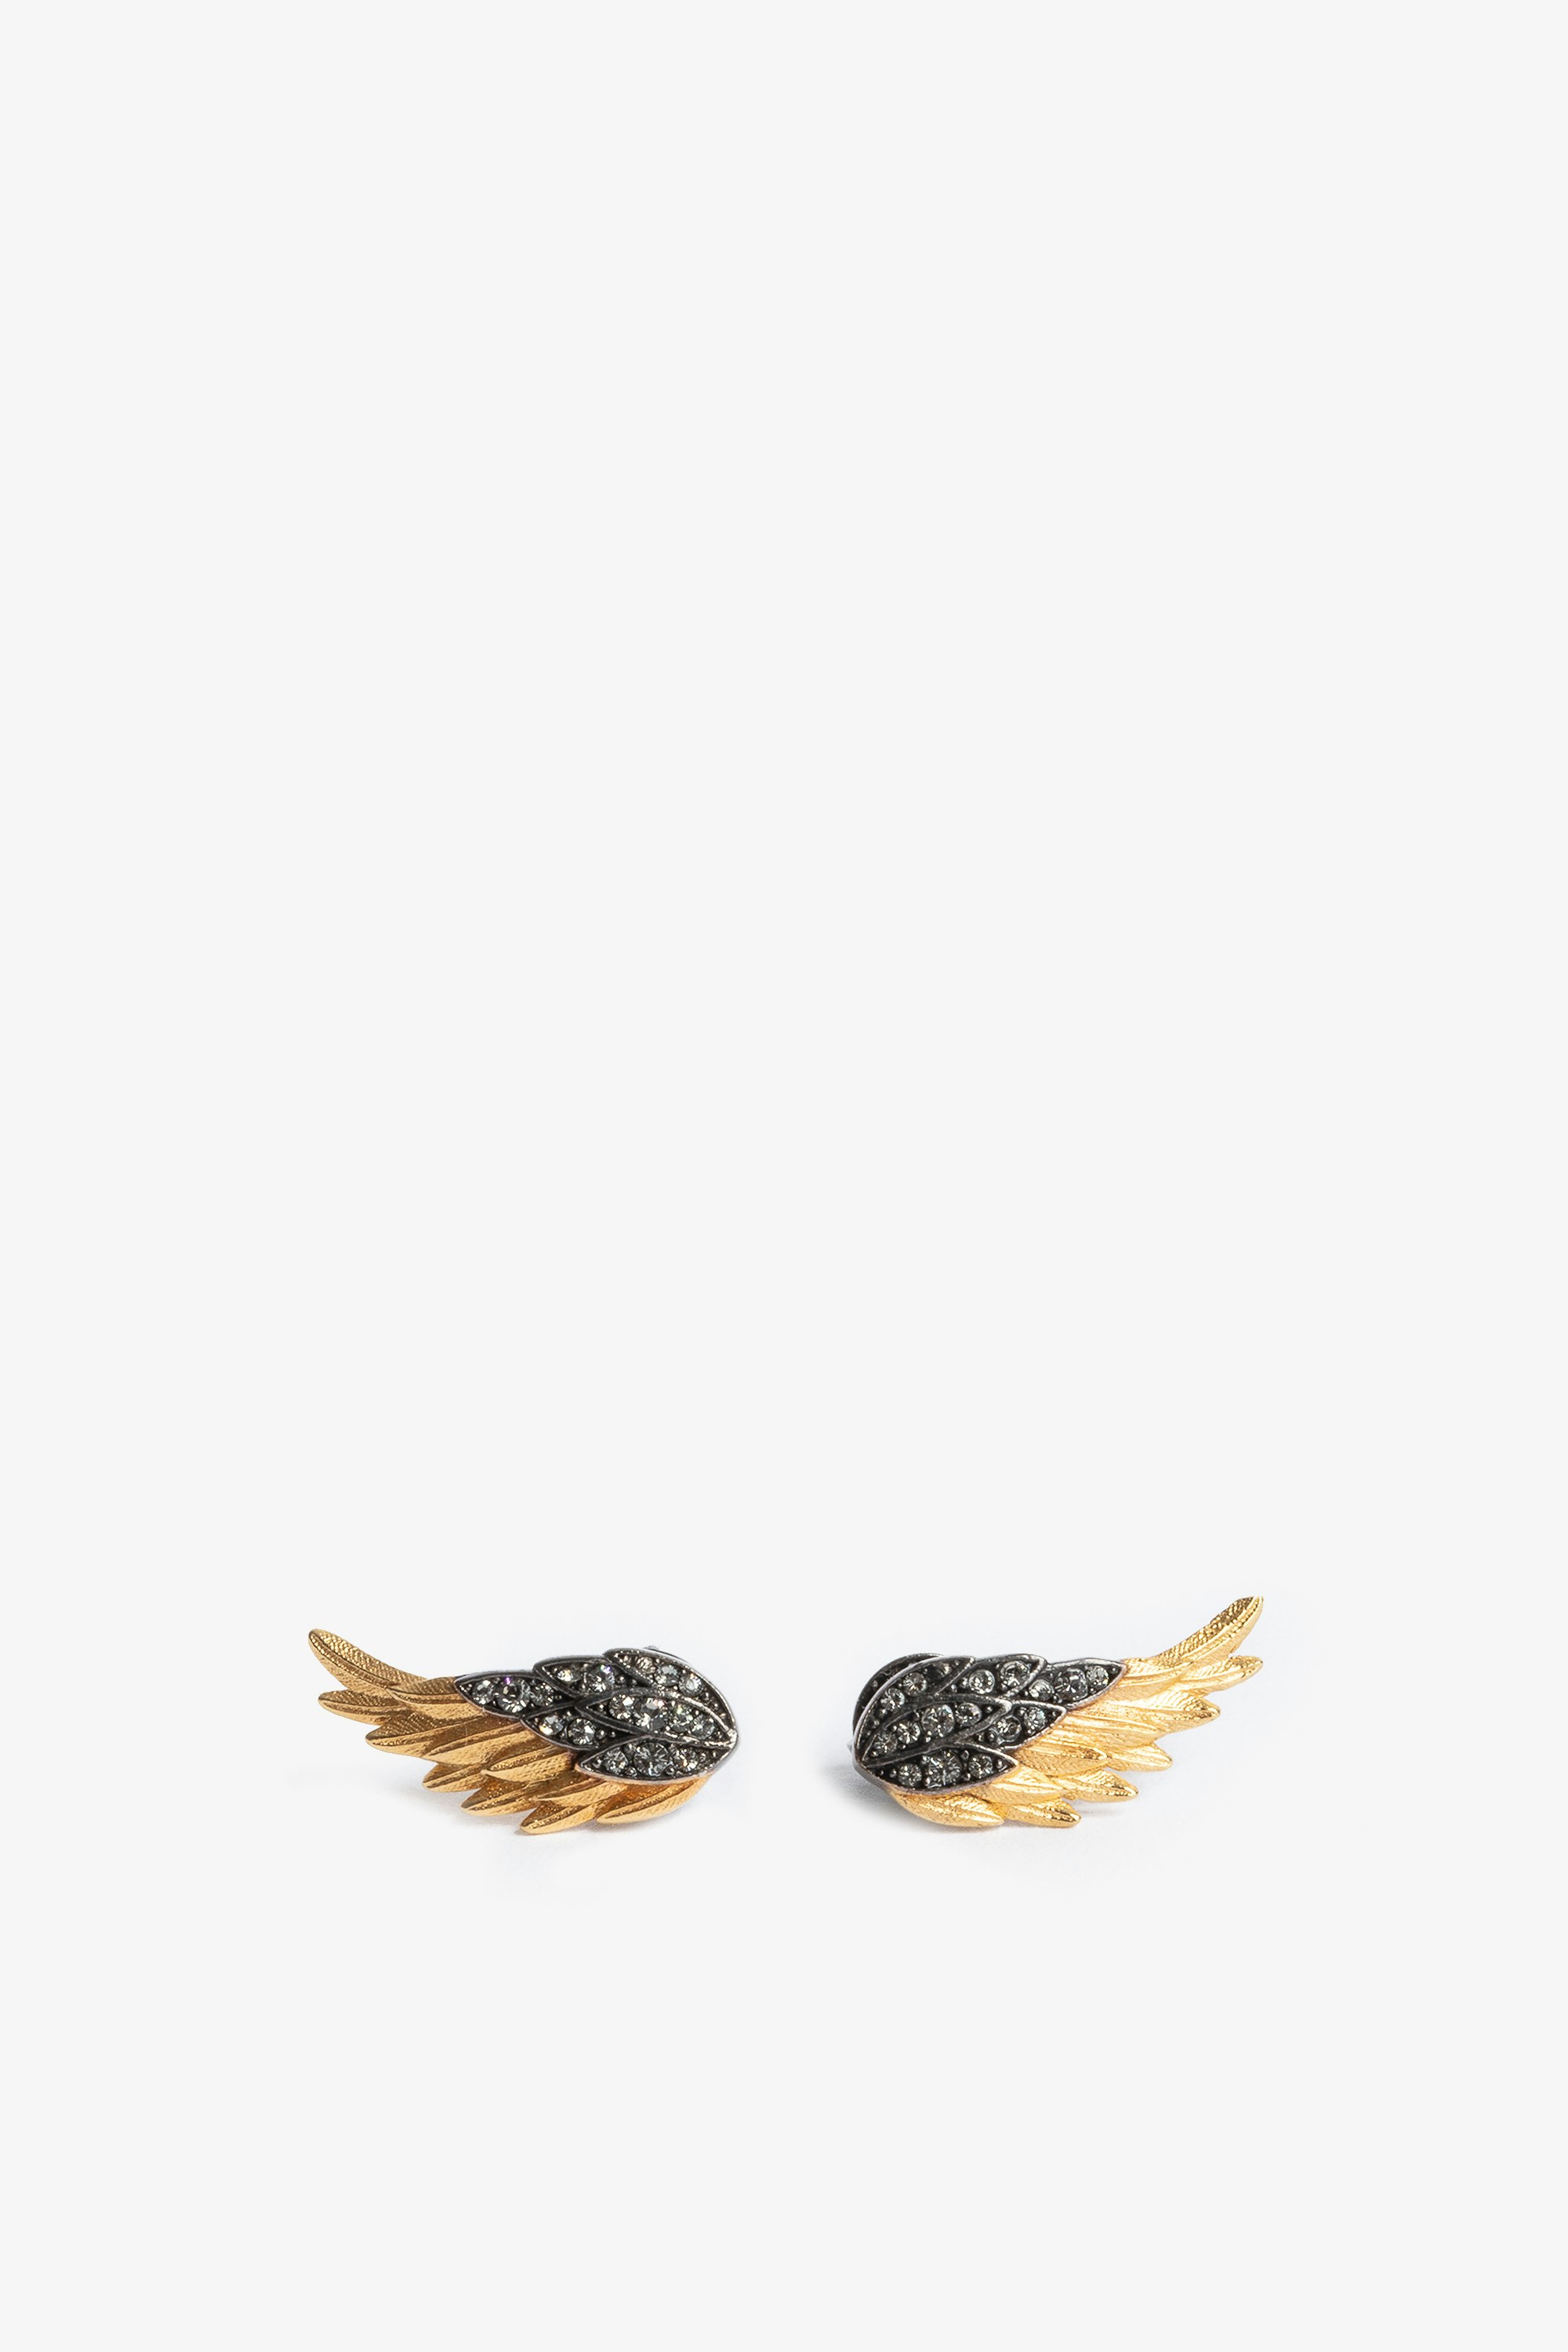 Rock Feather Earrings - Blackened and gold-tone brass crystal-embellished wings earrings.